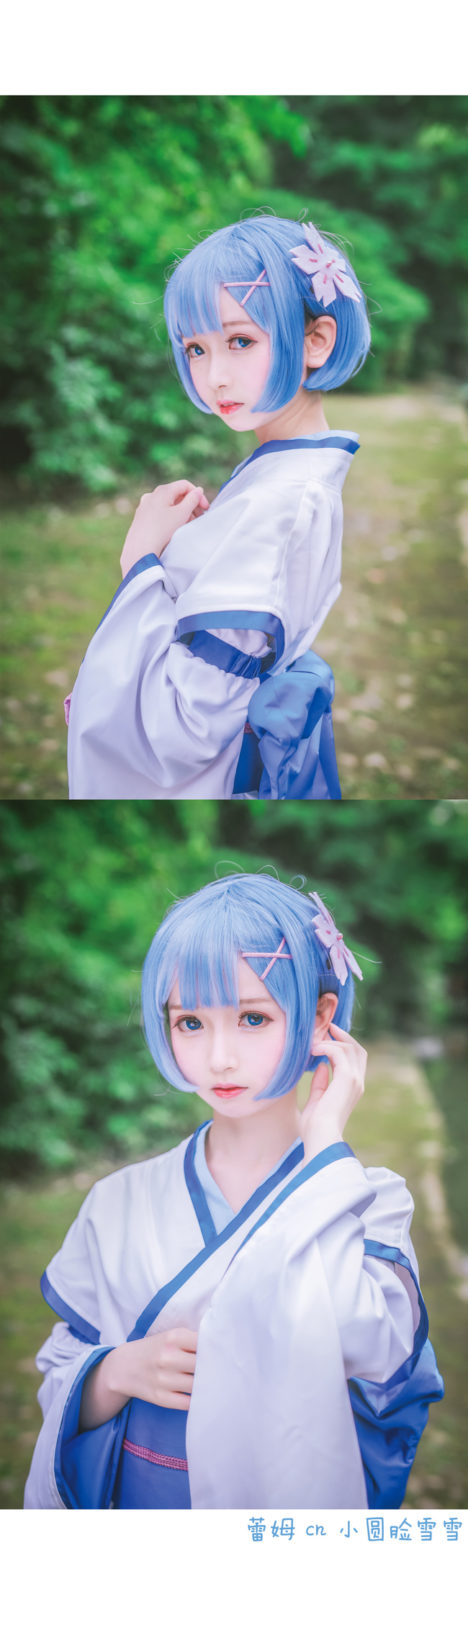 Young-Rem-Ram-Cosplay-6